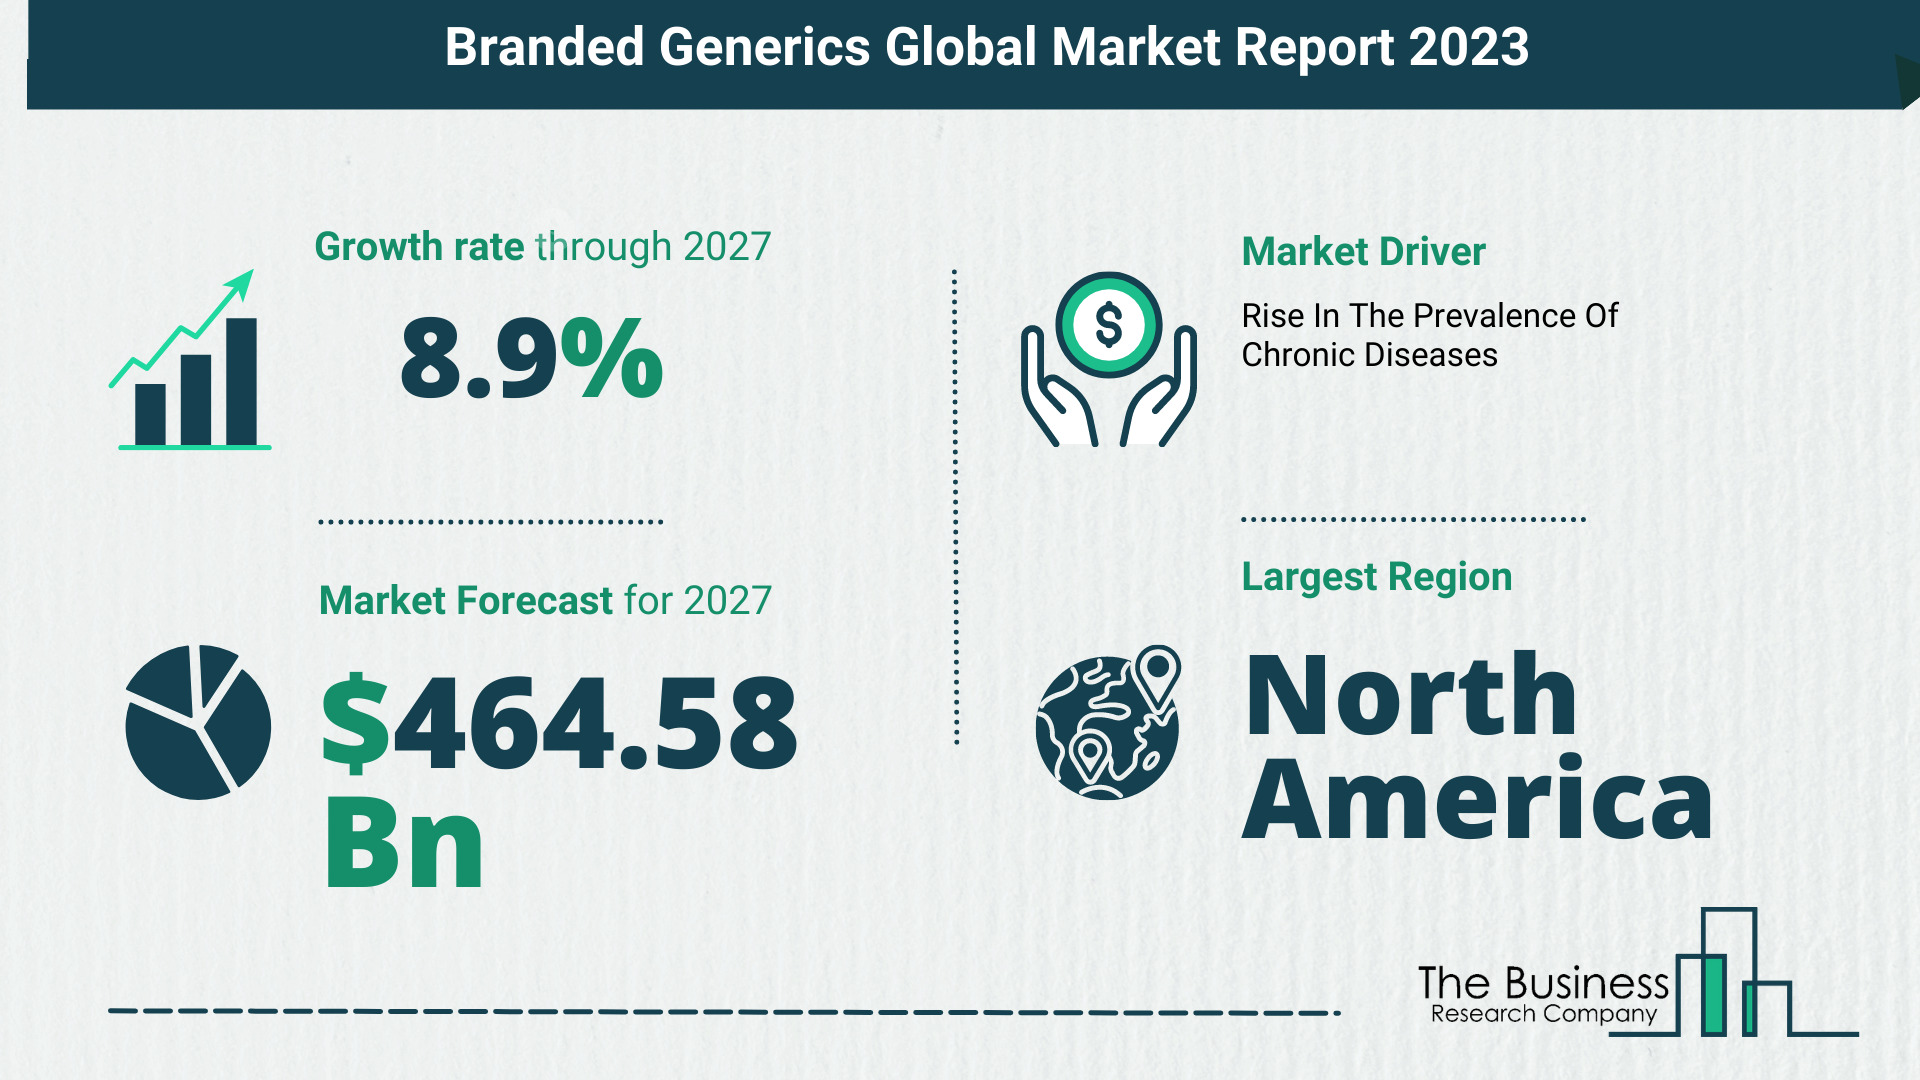 Key Insights On The Branded Generics Market 2023 – Size, Driver, And Major Players